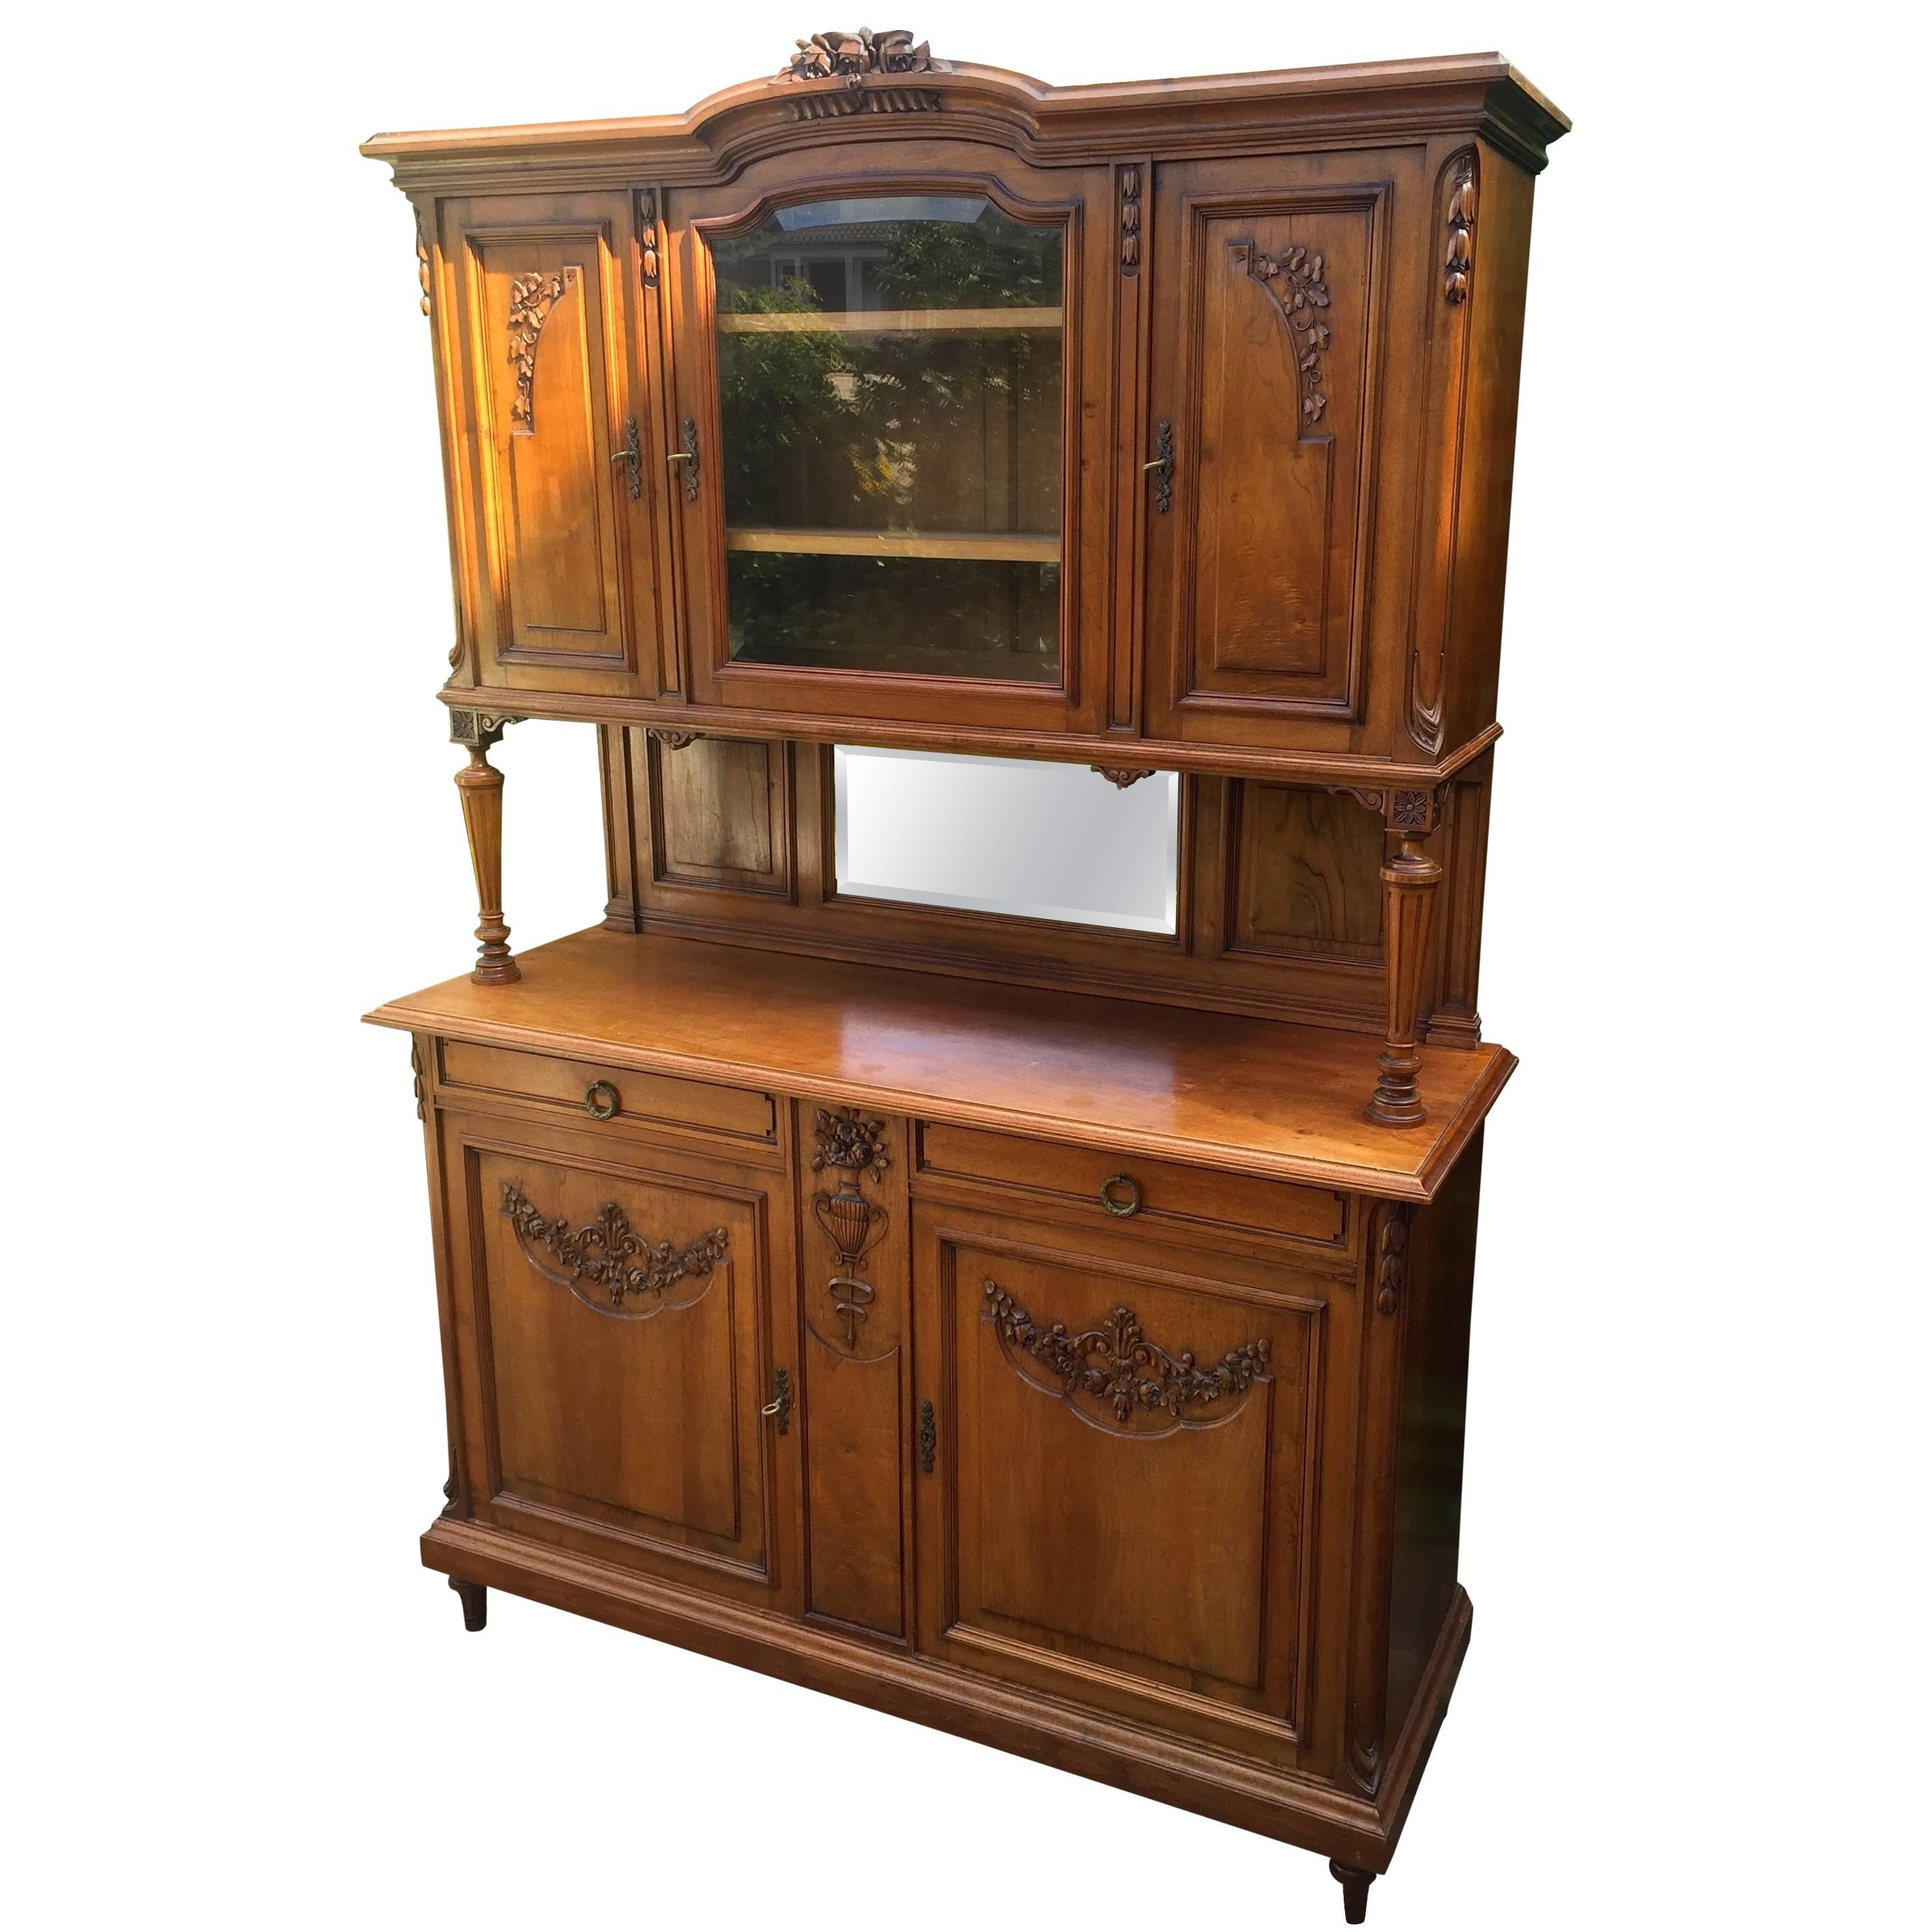 Early 1900's French Hand-Carved Walnut Three-Piece Sideboard Server Cupboard